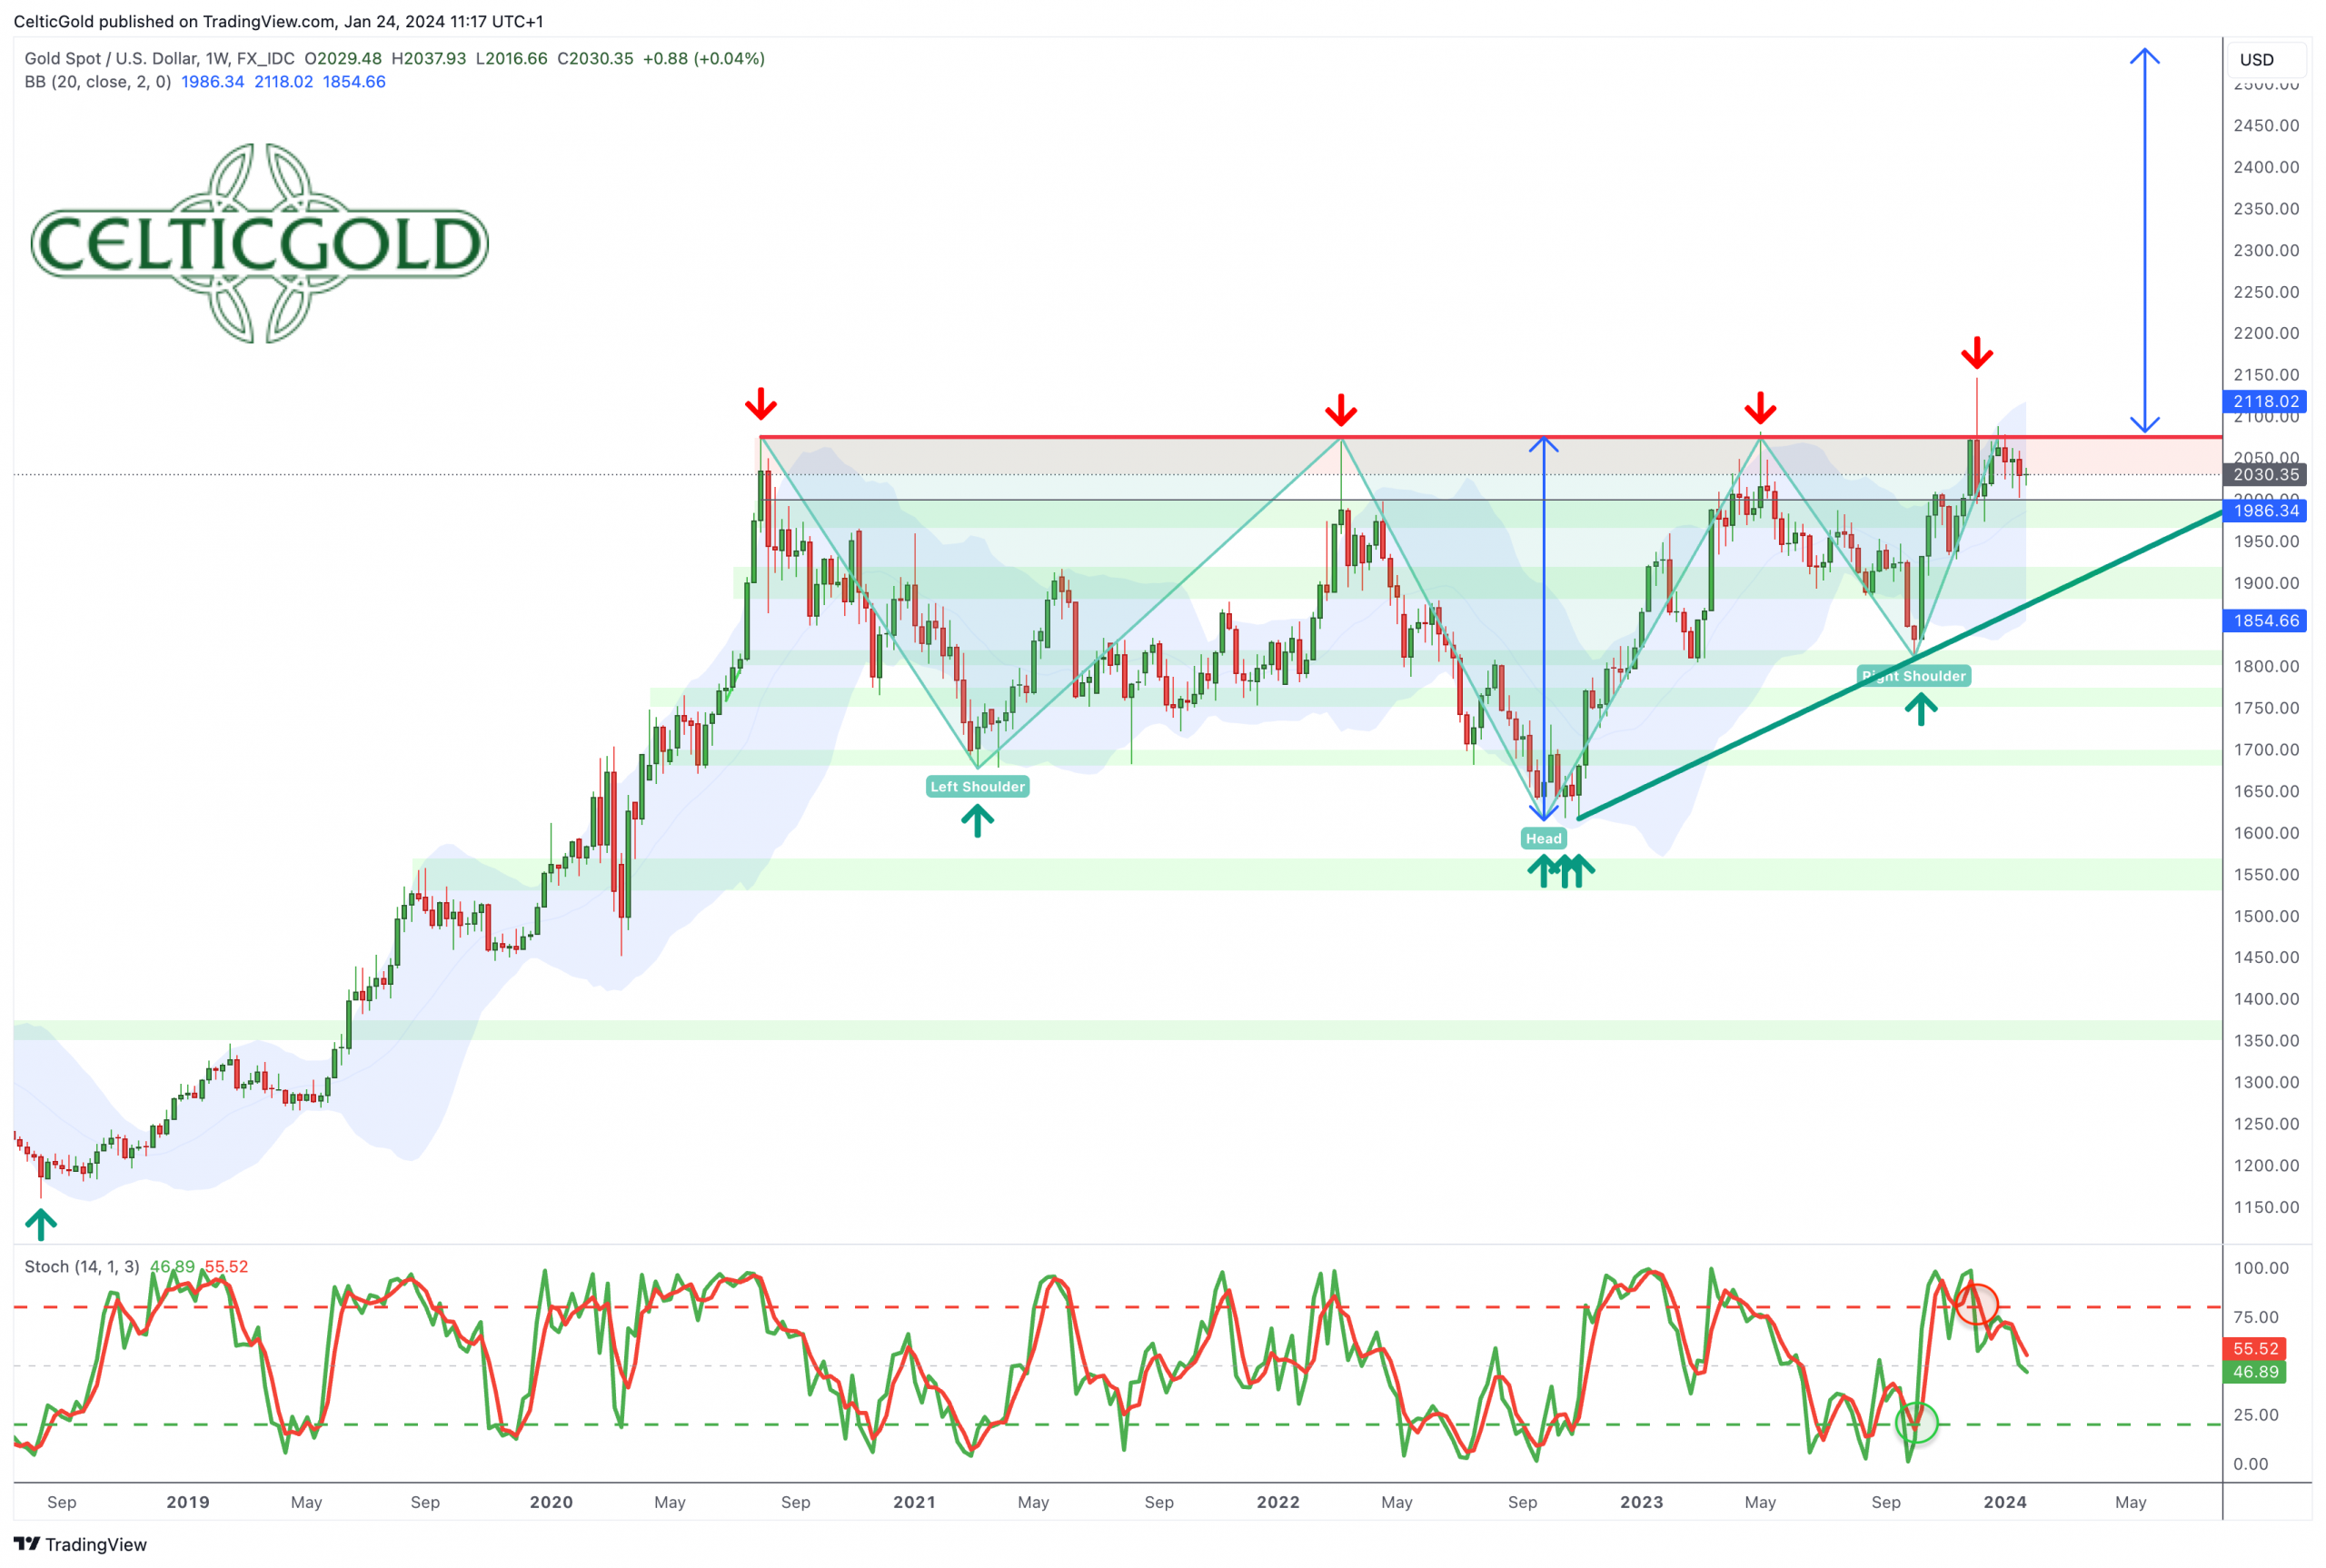 Gold in US-Dollar, weekly chart as of January 24th, 2024. Source: Tradingview. January 24th, 2024, Gold - Consolidation above USD 2,000 continues